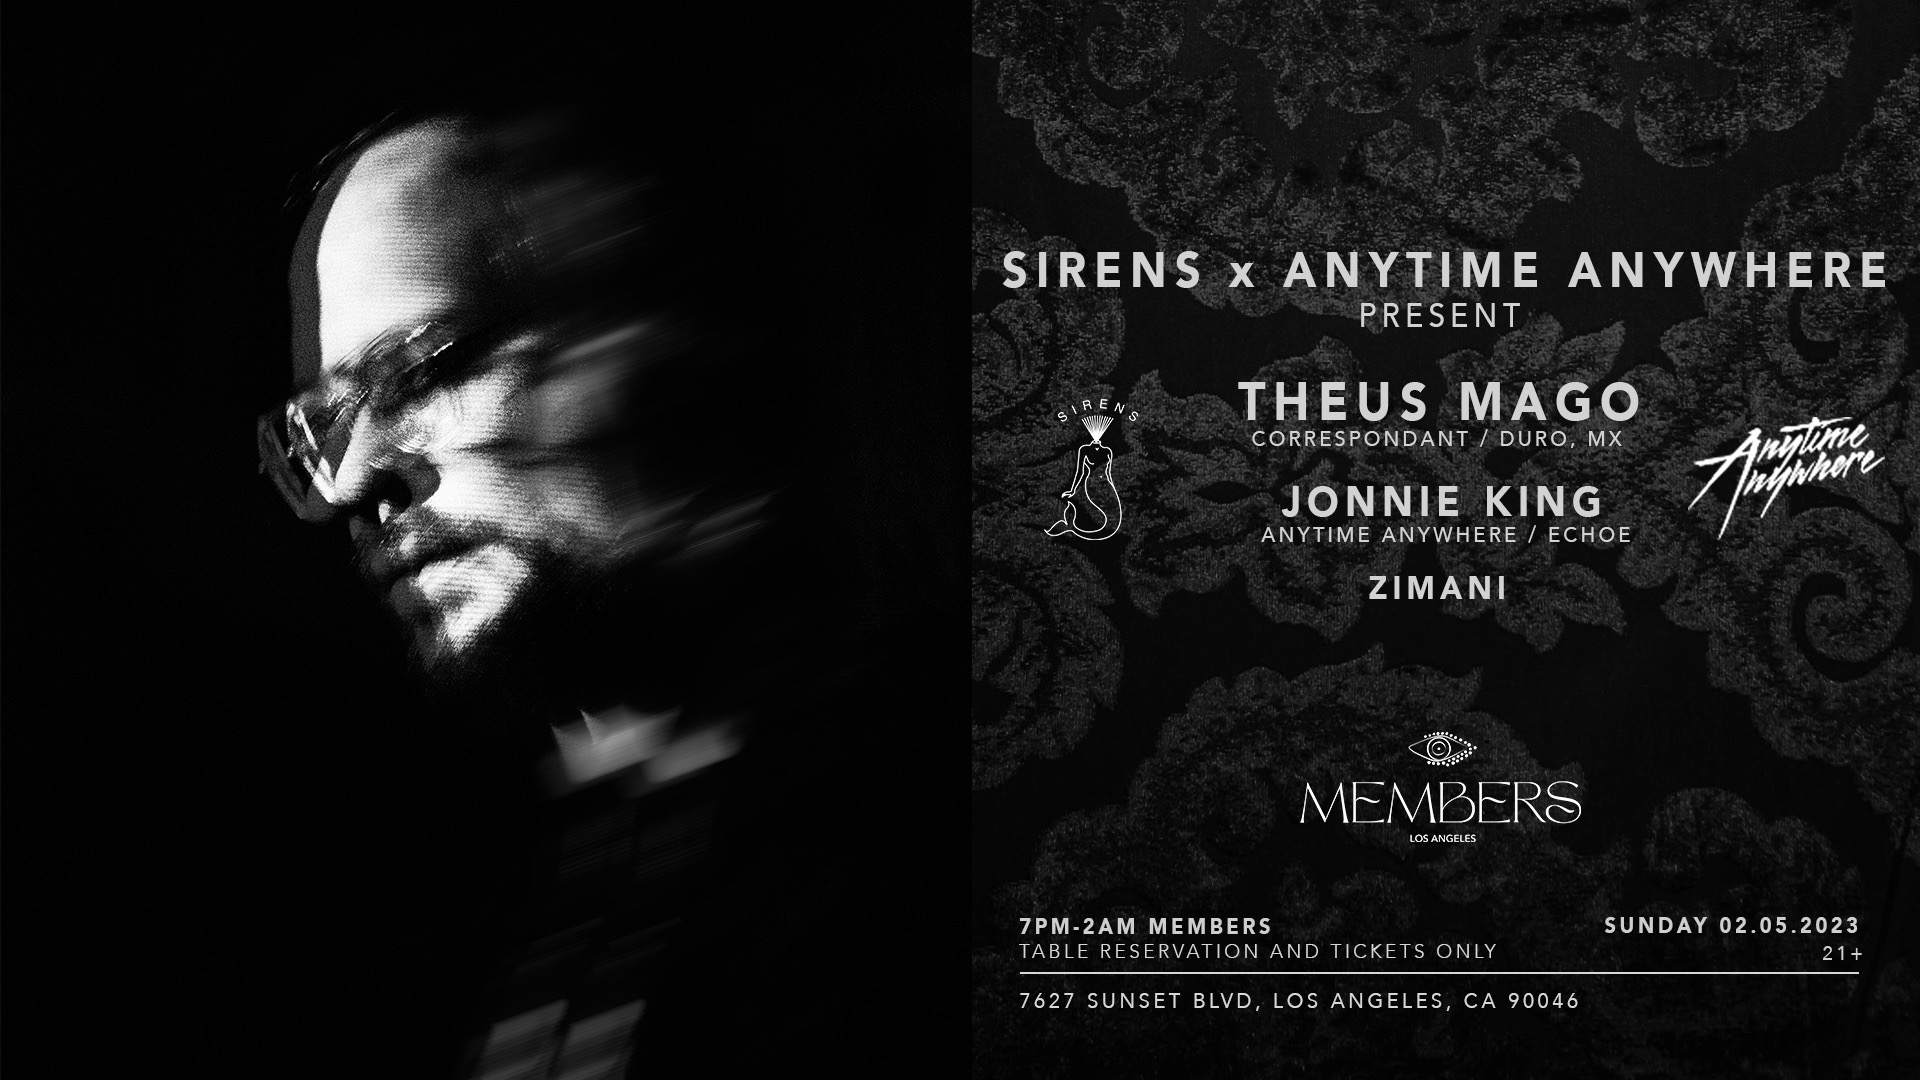 Sirens x Anytime Anywhere present: Theus Mago and Jonnie King - Página frontal